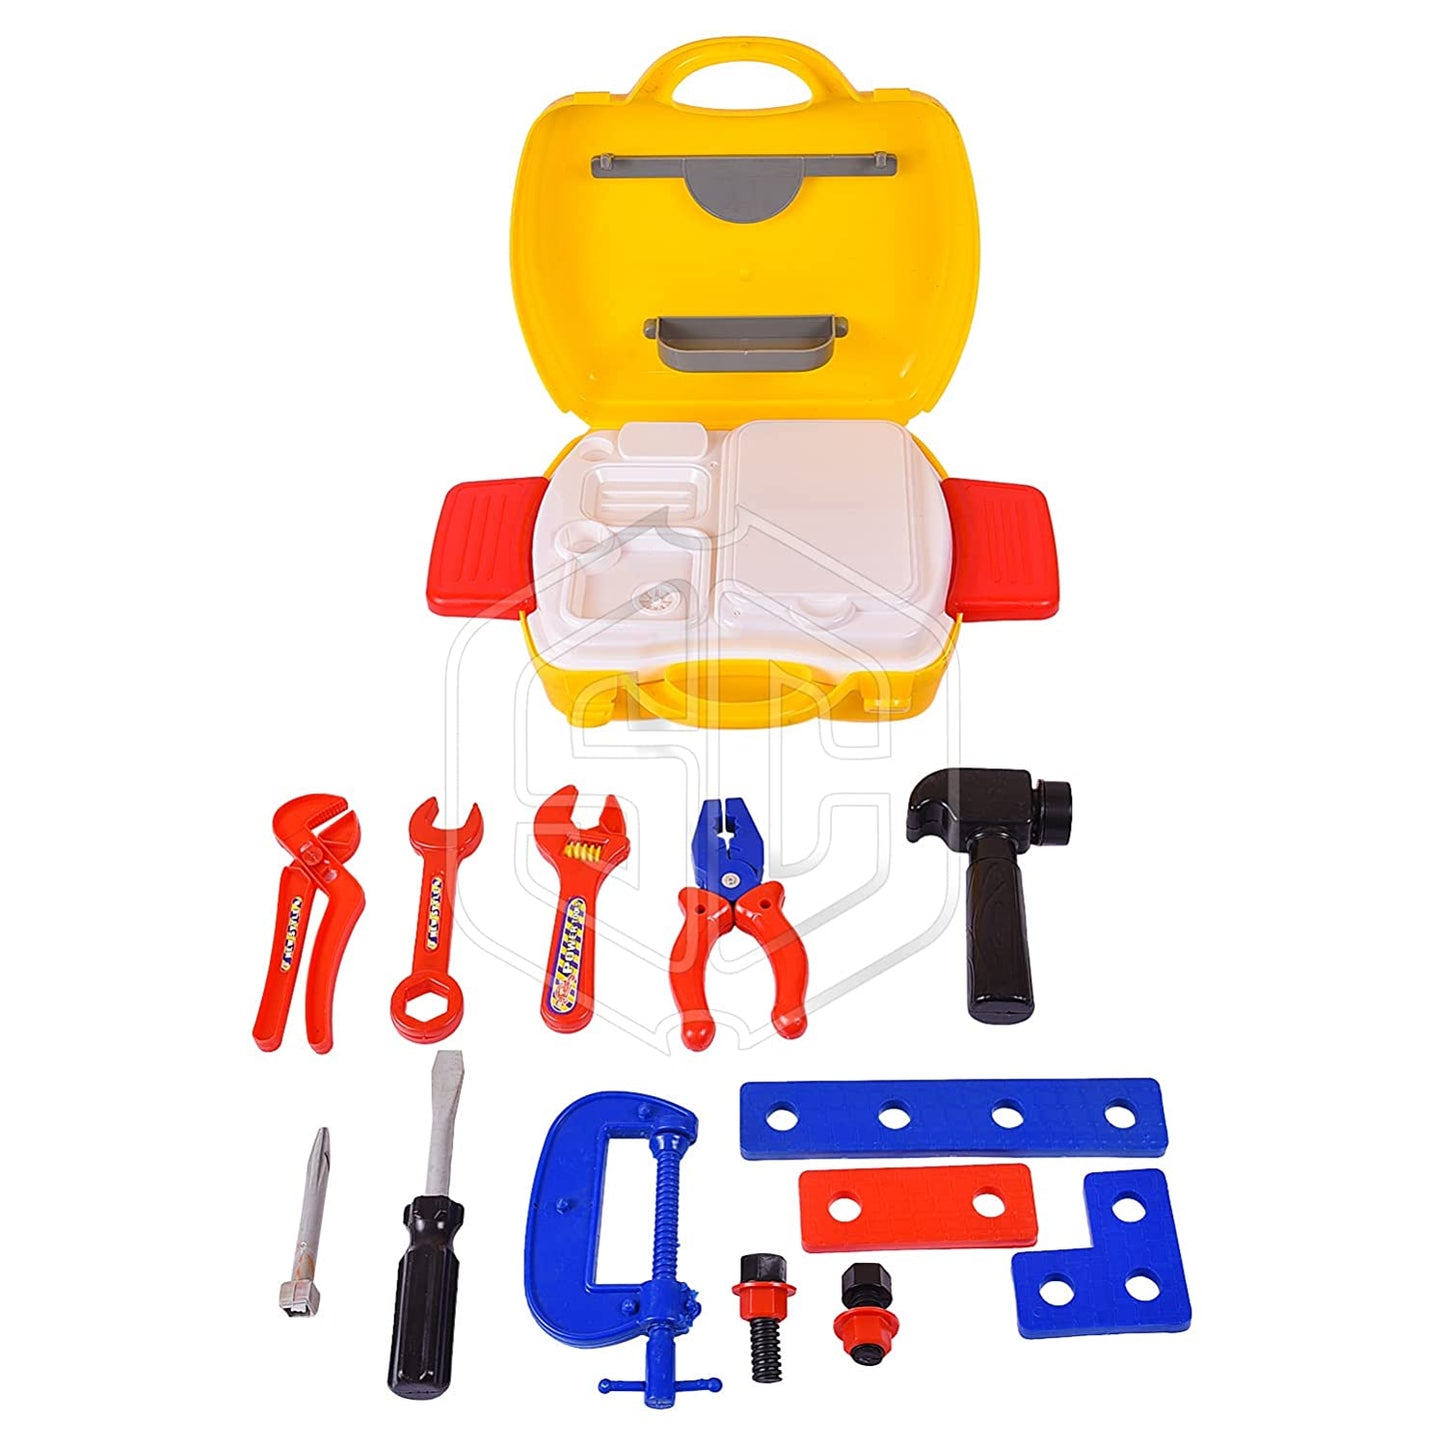 Tool Set, Best Screwdriver Set Toys For Kids, Set Of 16 Pieces, Pretend Play Tool Kit Set For Kids